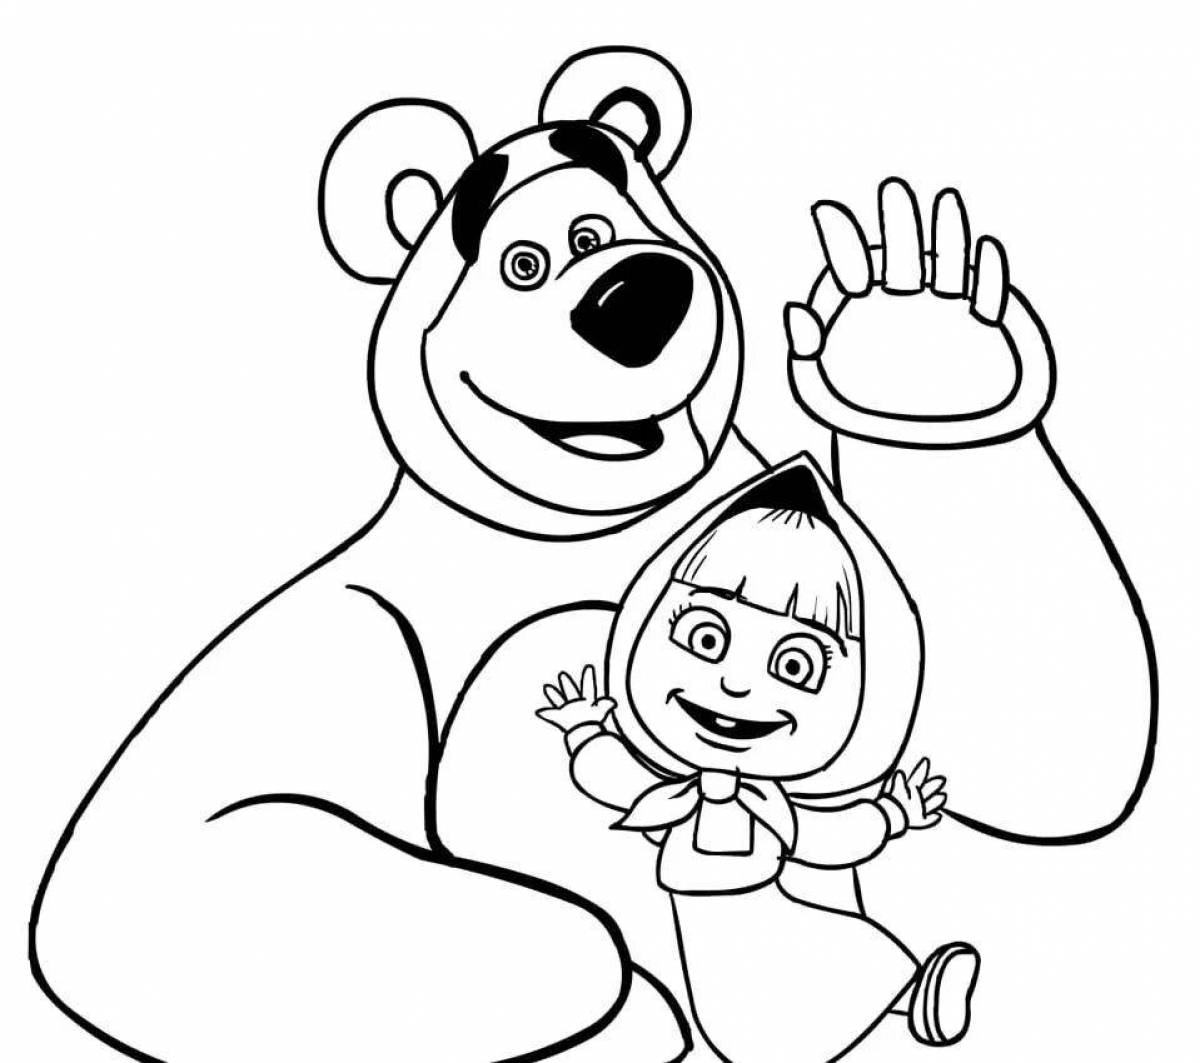 Pictures of masha and the bear #13